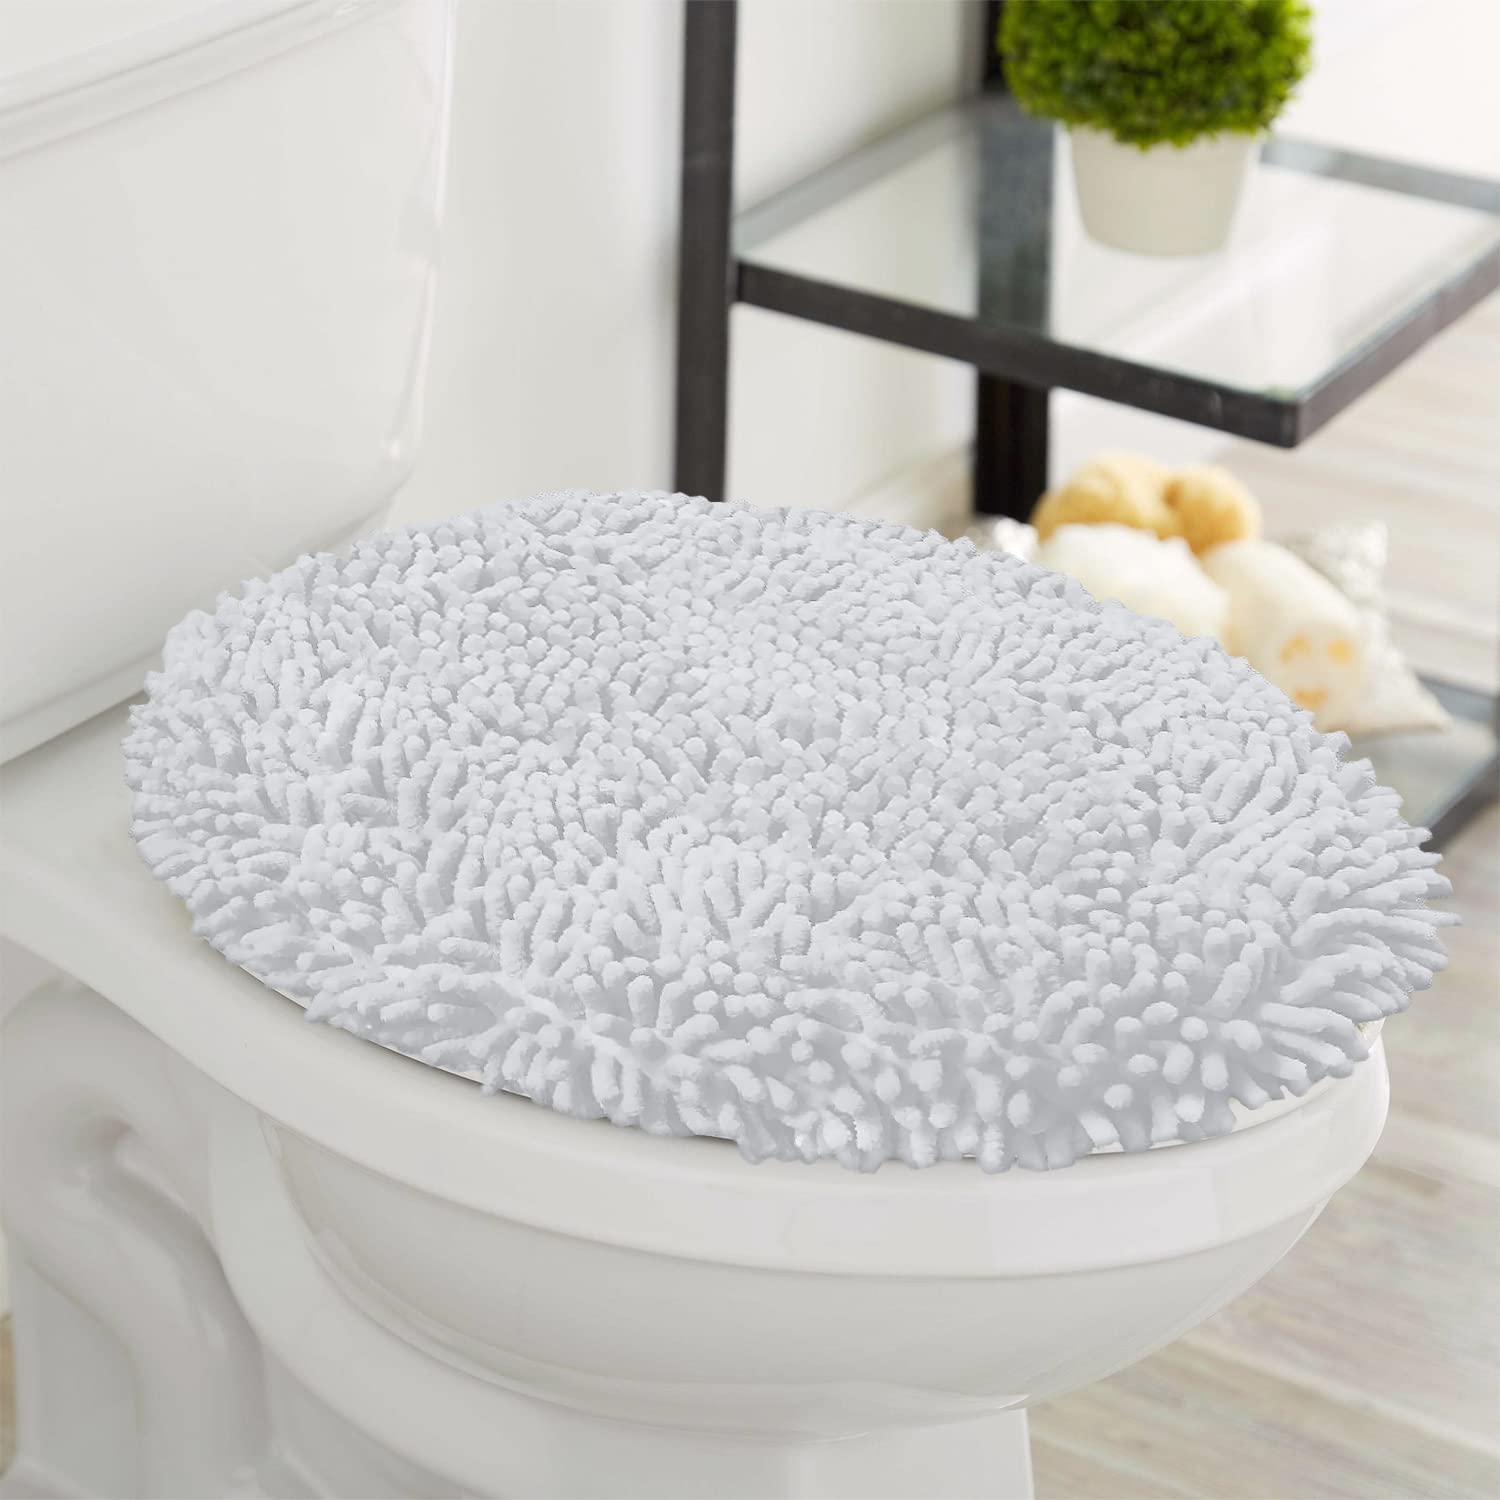 LuxUrux Toilet Lid Cover, Extra-Soft Plush Seat Cloud Washable Shaggy Microfiber Standard Toilet Lid Covers for Bathroom Machine Wash & Dry.  - Like New